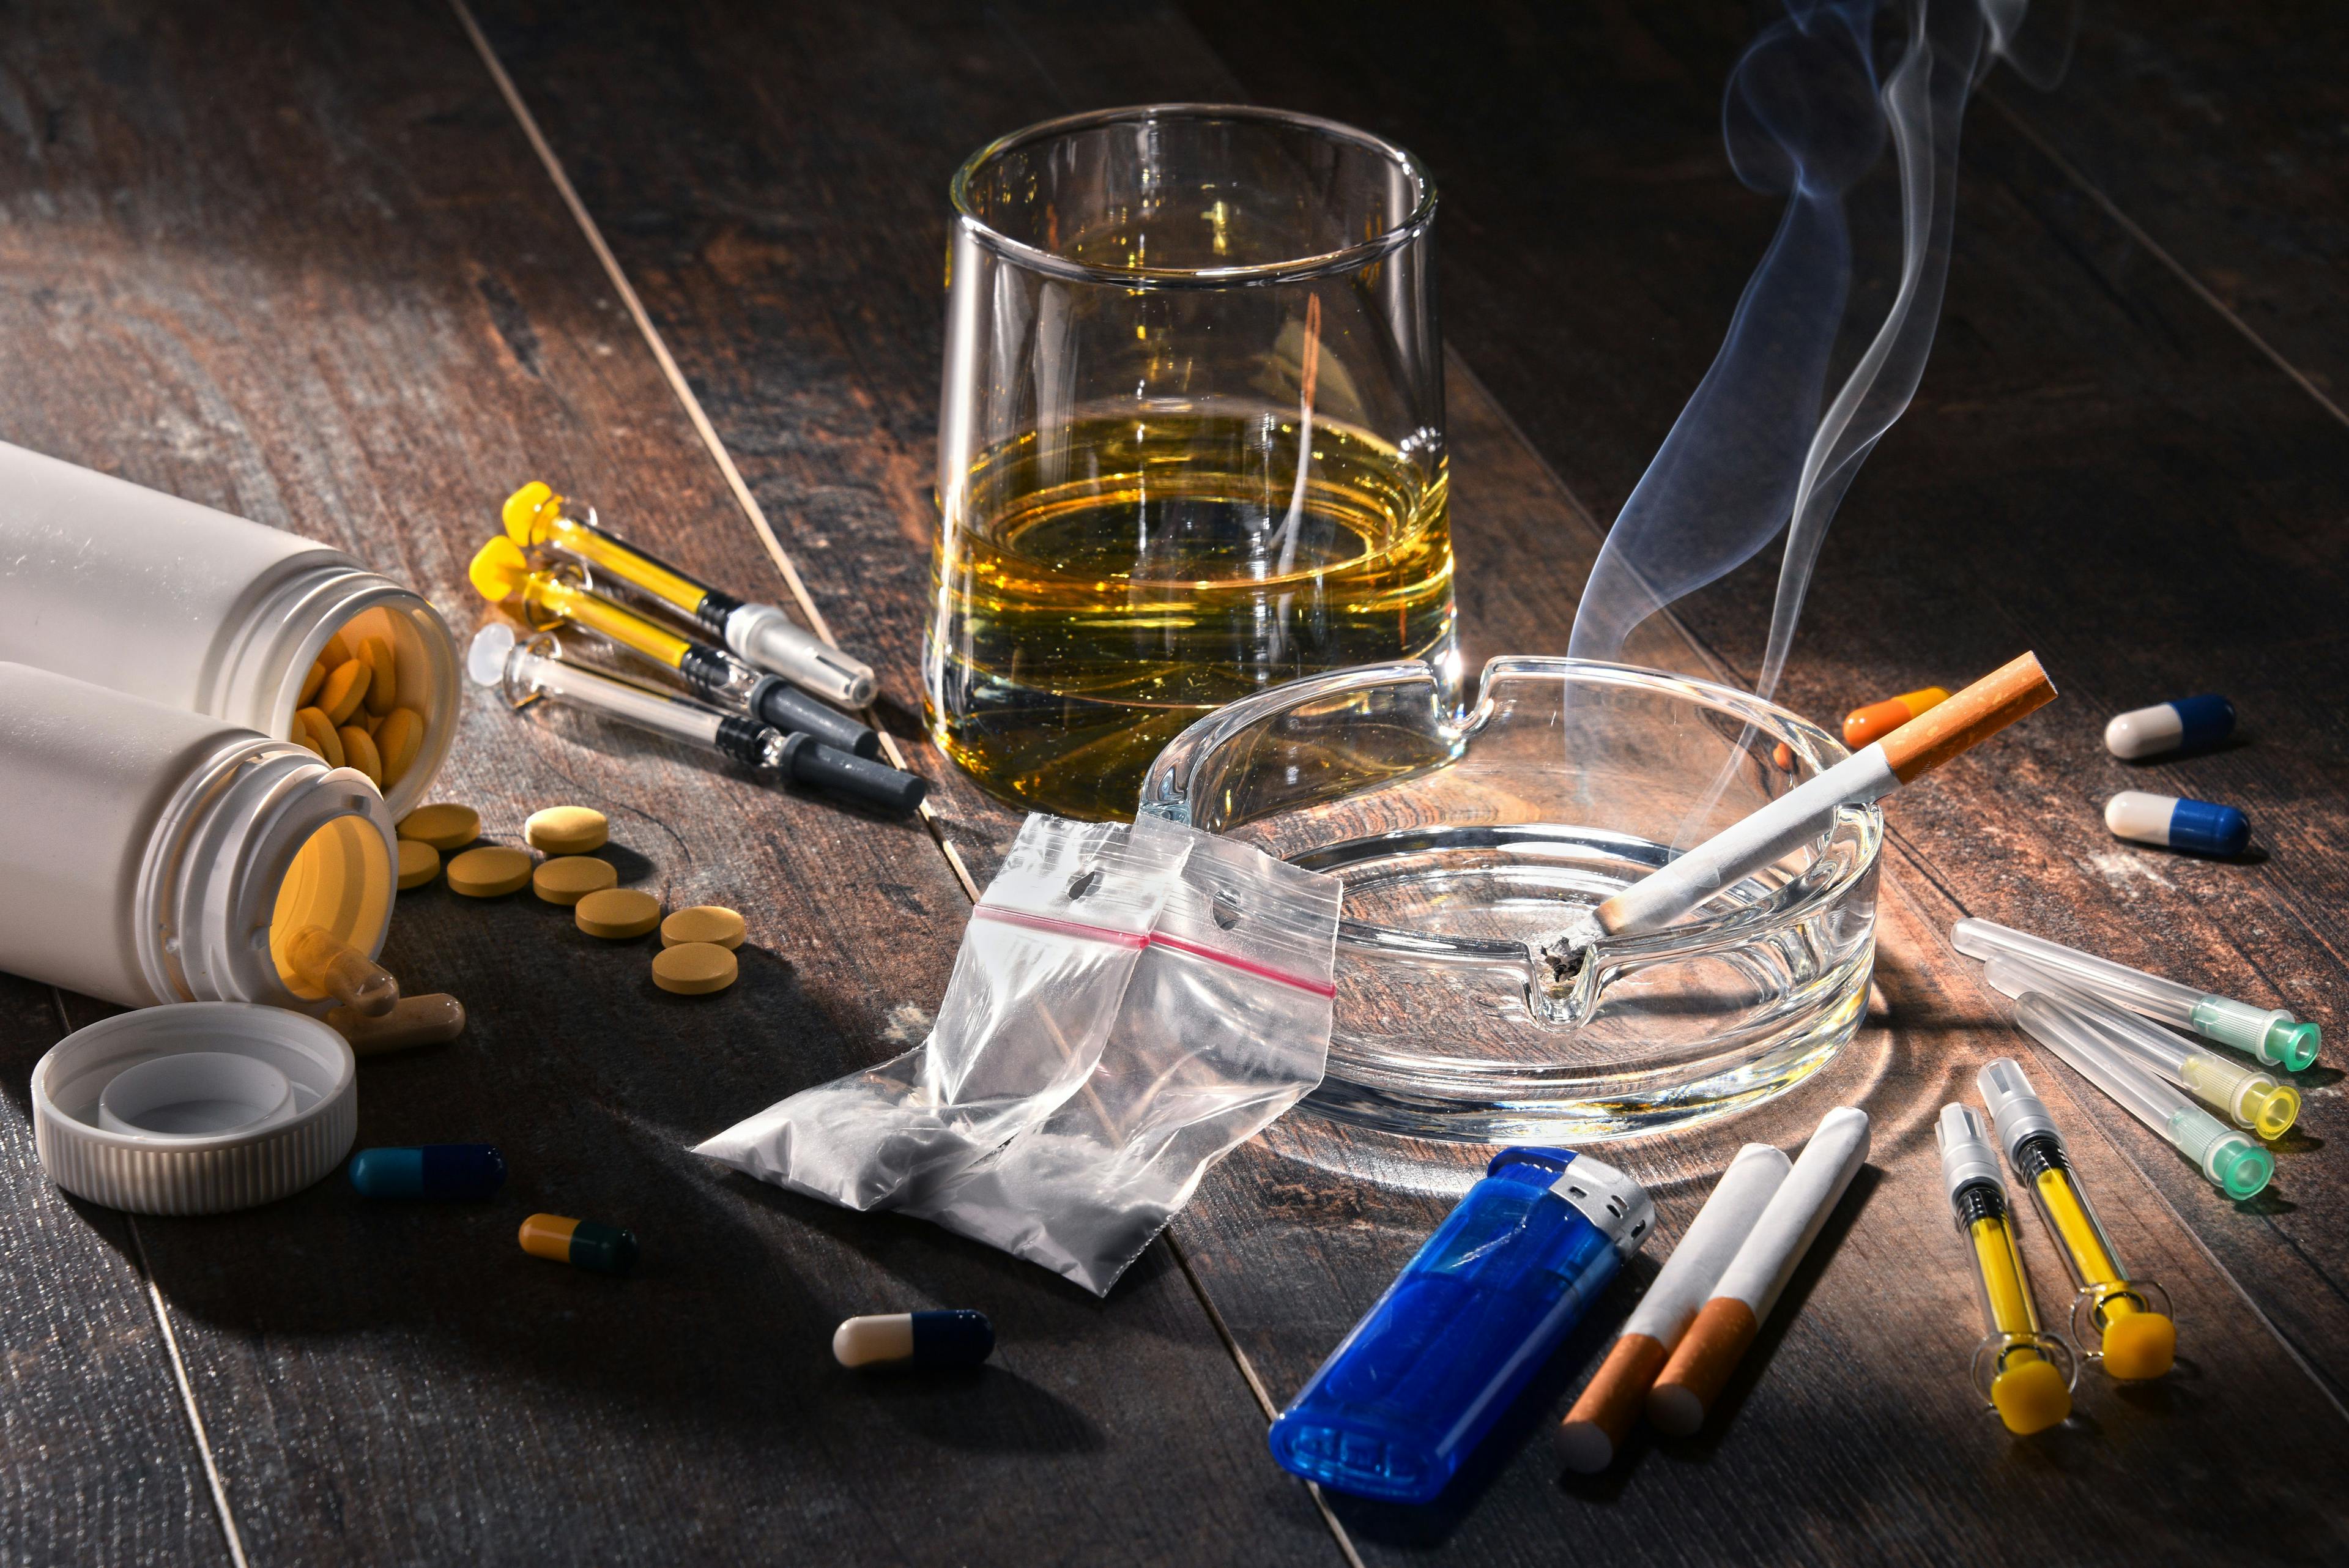 Addictive substances, including alcohol, cigarettes and drugs | Image Credit: © monticellllo - stock.adobe.com